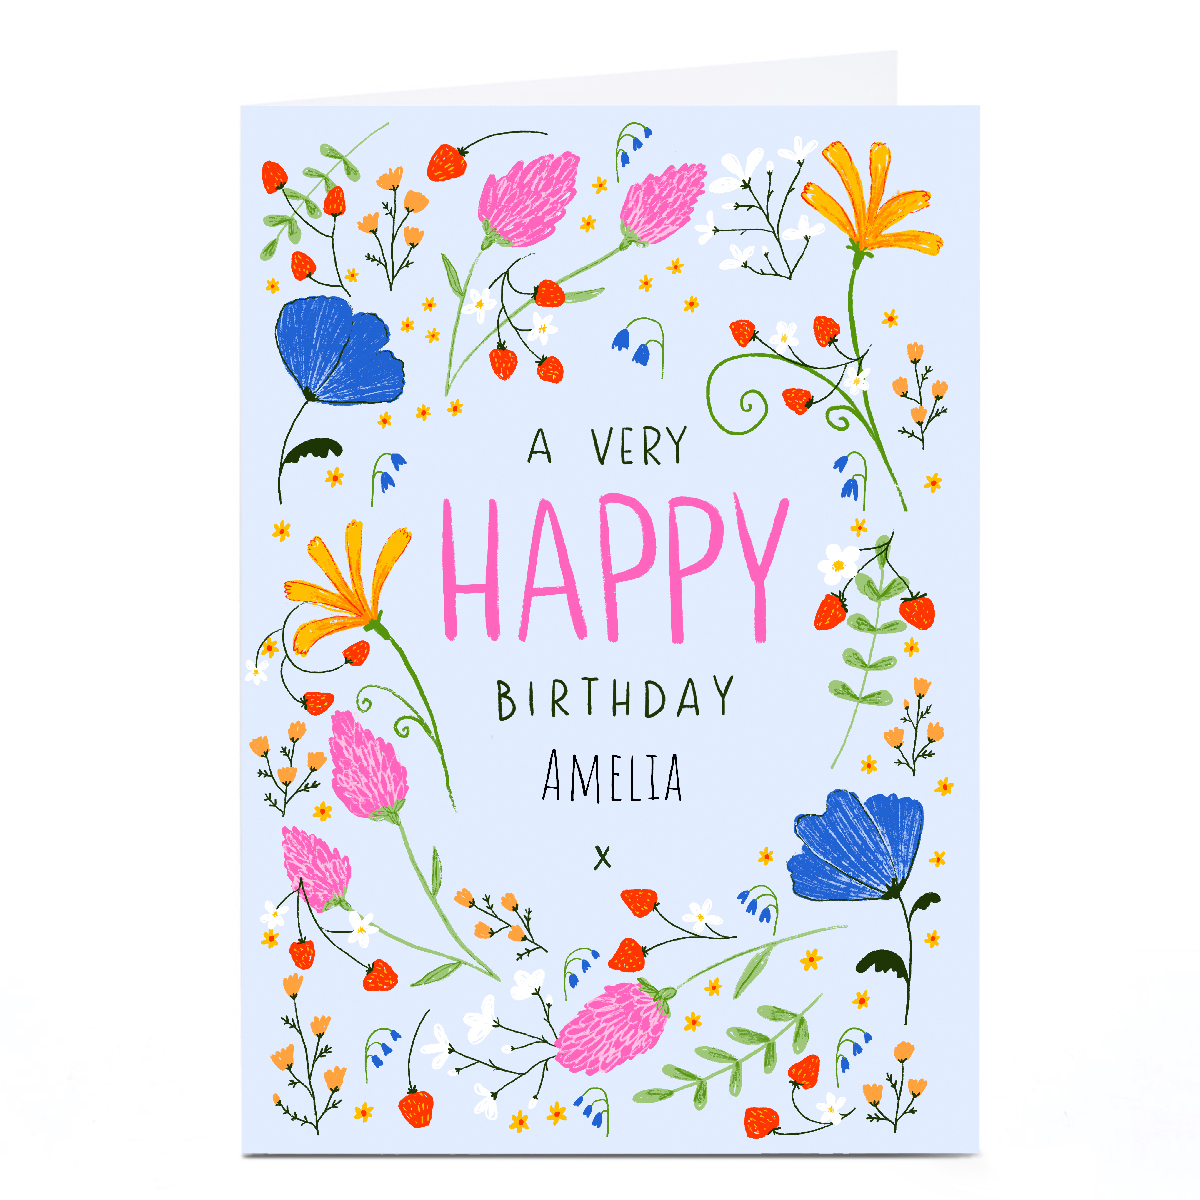 Personalised Emma Valenghi Birthday Card - Bright Flowers, Any Name